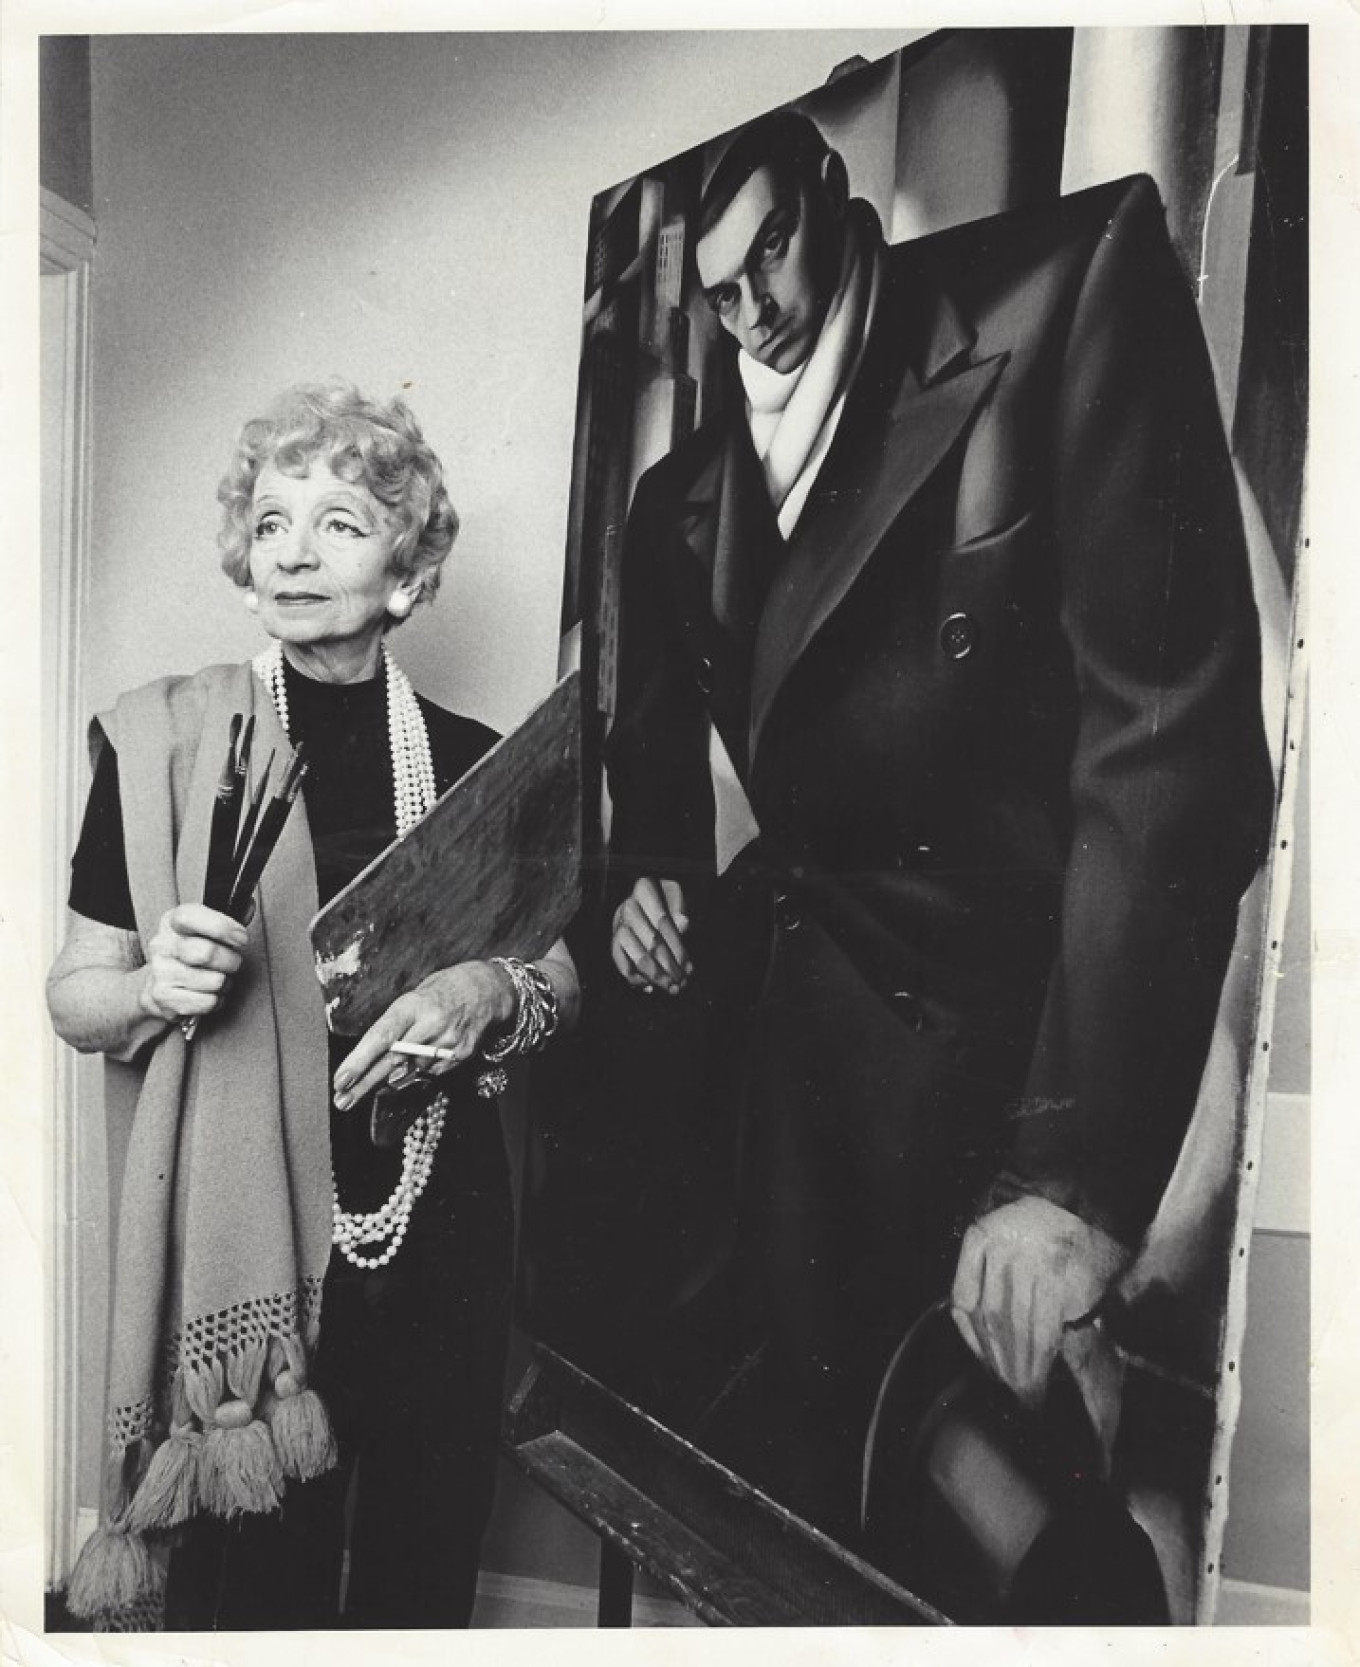  Lempicka and first husband Tadeusz de Lempicki, circa 1973 Bill Clough, Houston Chronicle / Collection of Richard and Anne Paddy 